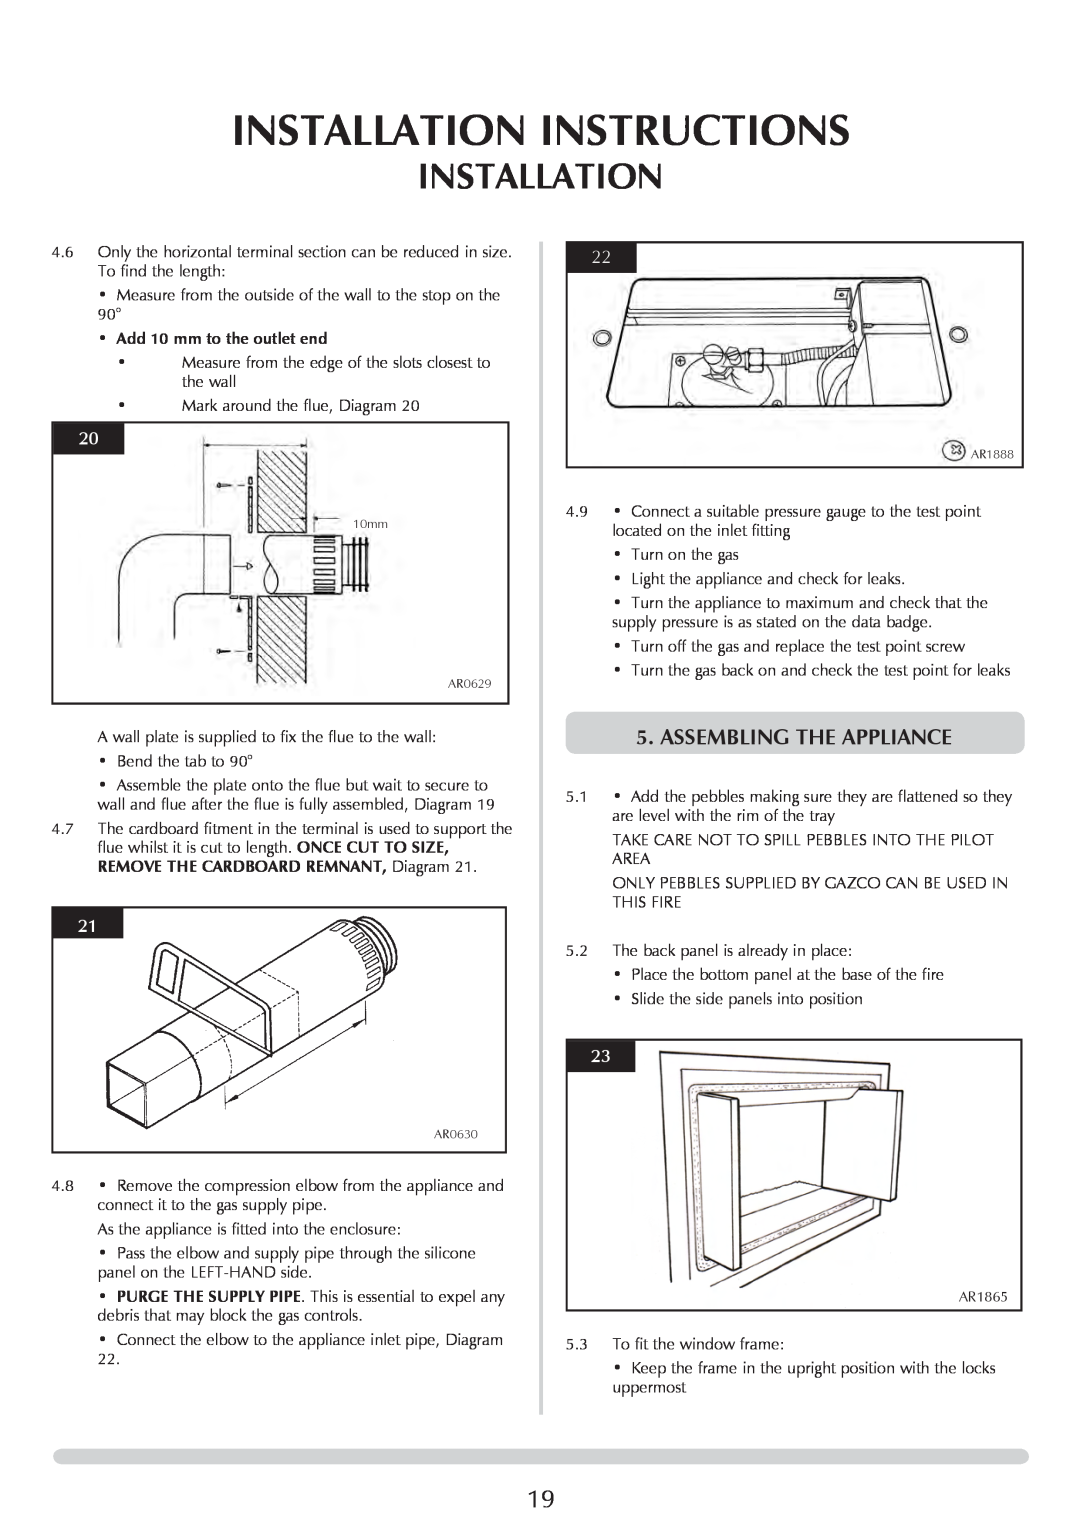 Stovax PR0919 manual Assembling The Appliance, Installation Instructions, Add 10 mm to the outlet end 